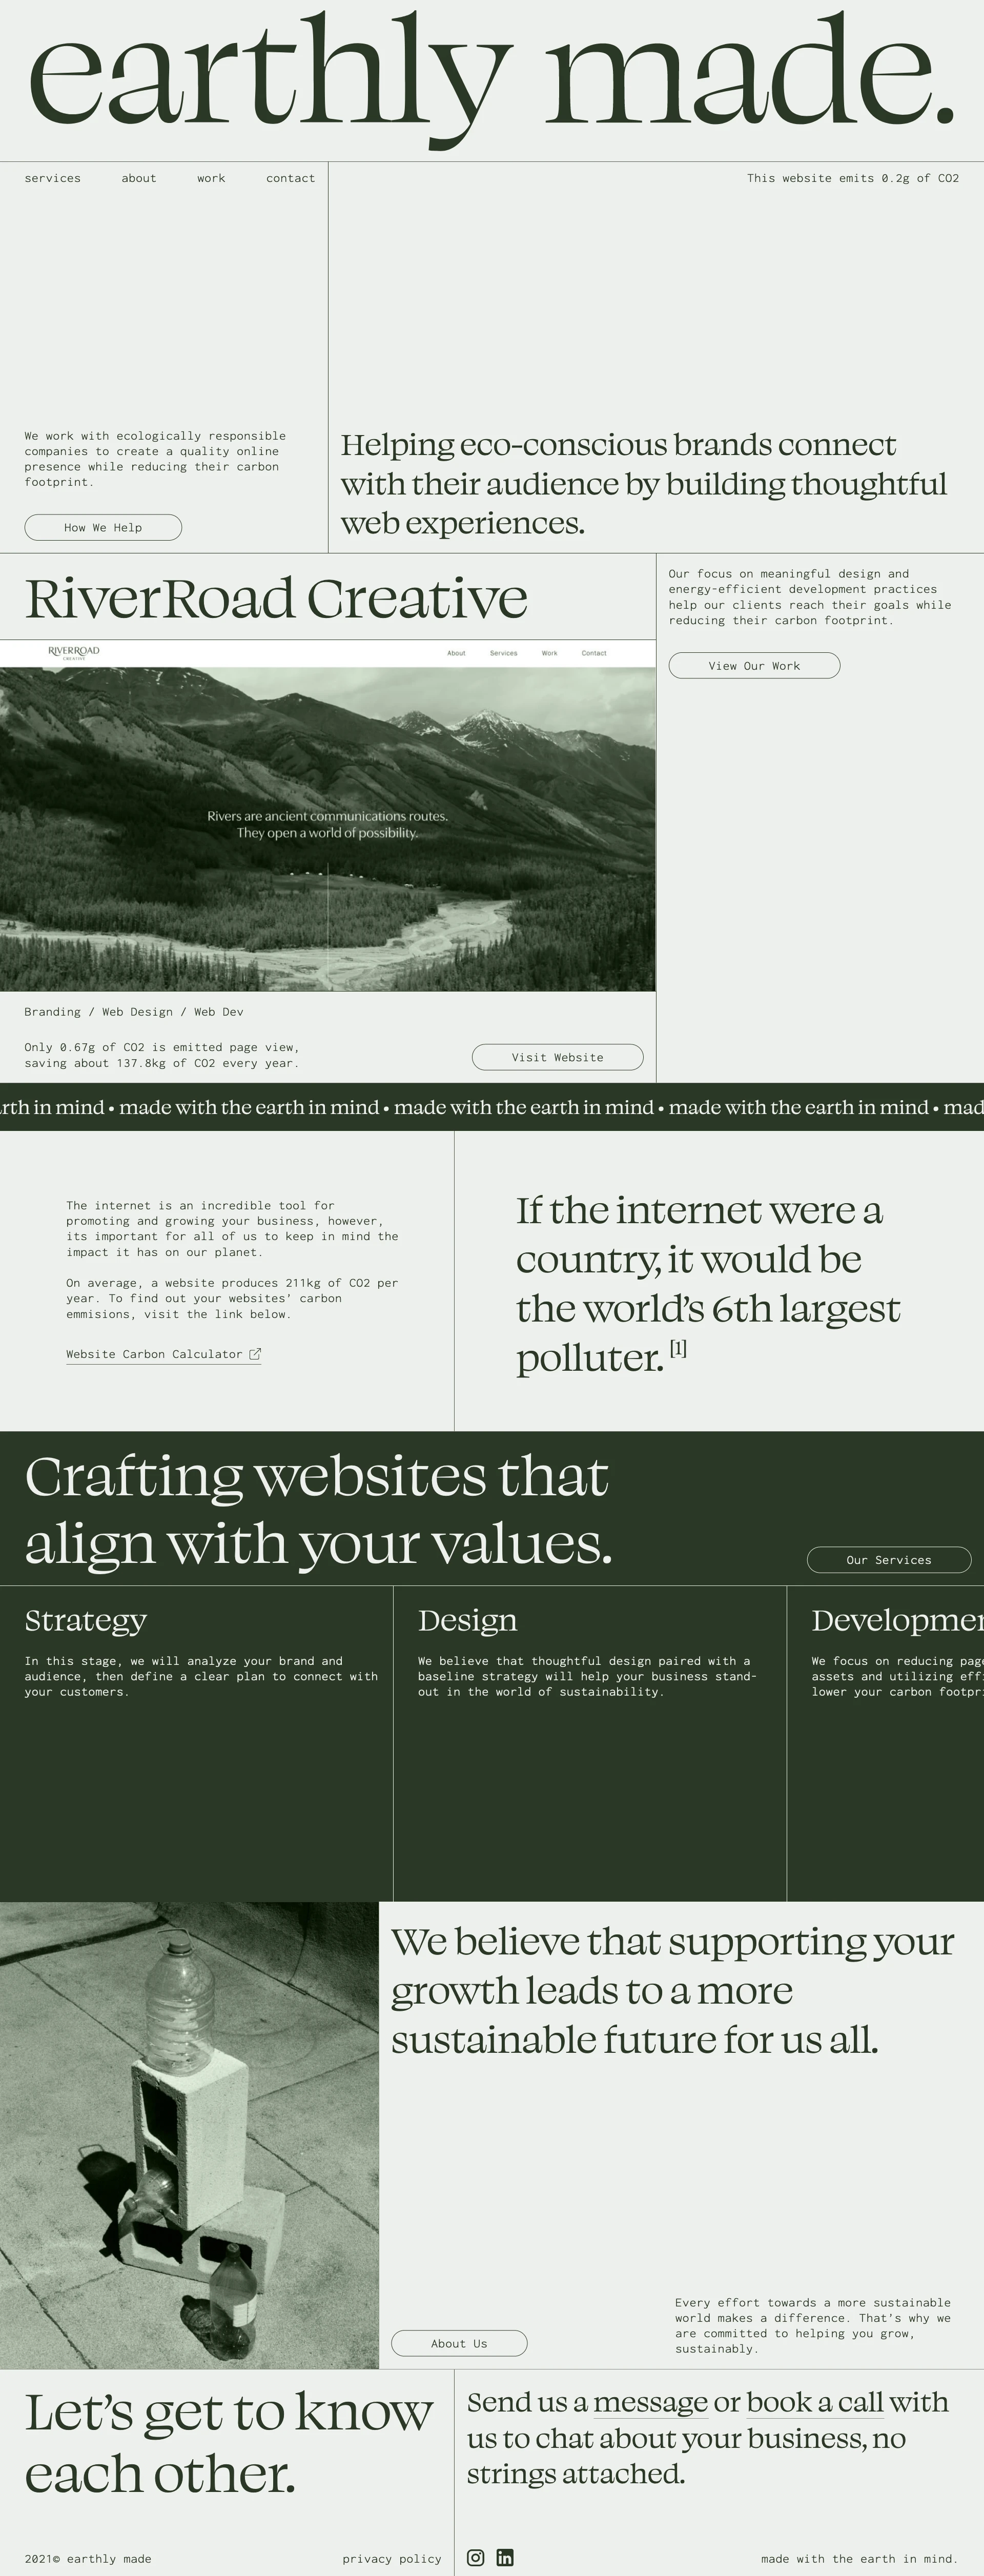 Earthly Made Landing Page Example: Helping eco-conscious brands connect with their audience by building thoughtful web experiences.